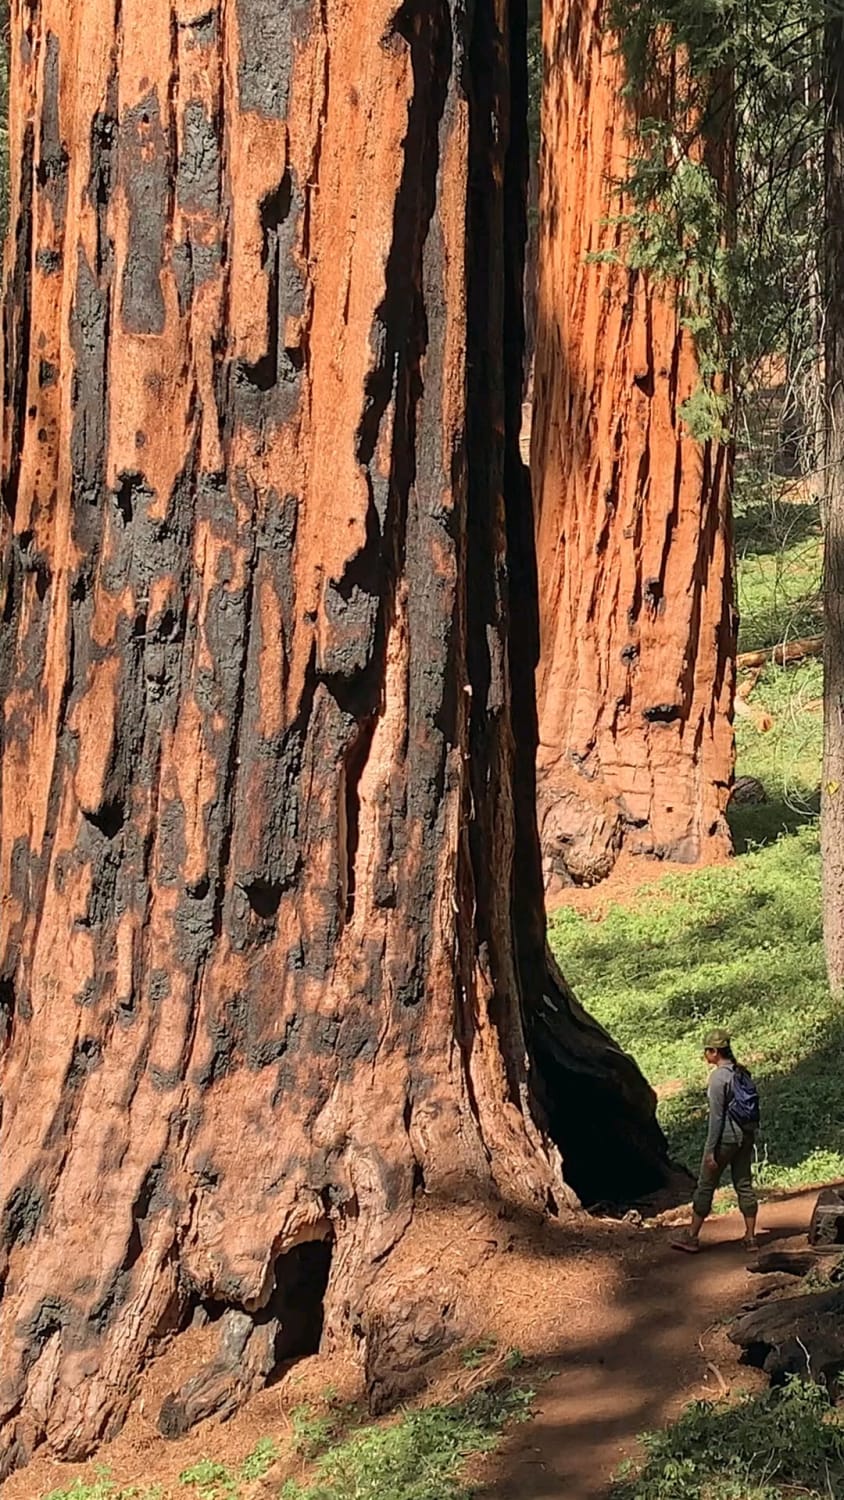 Walking amongst the giants | Sequoia National Park